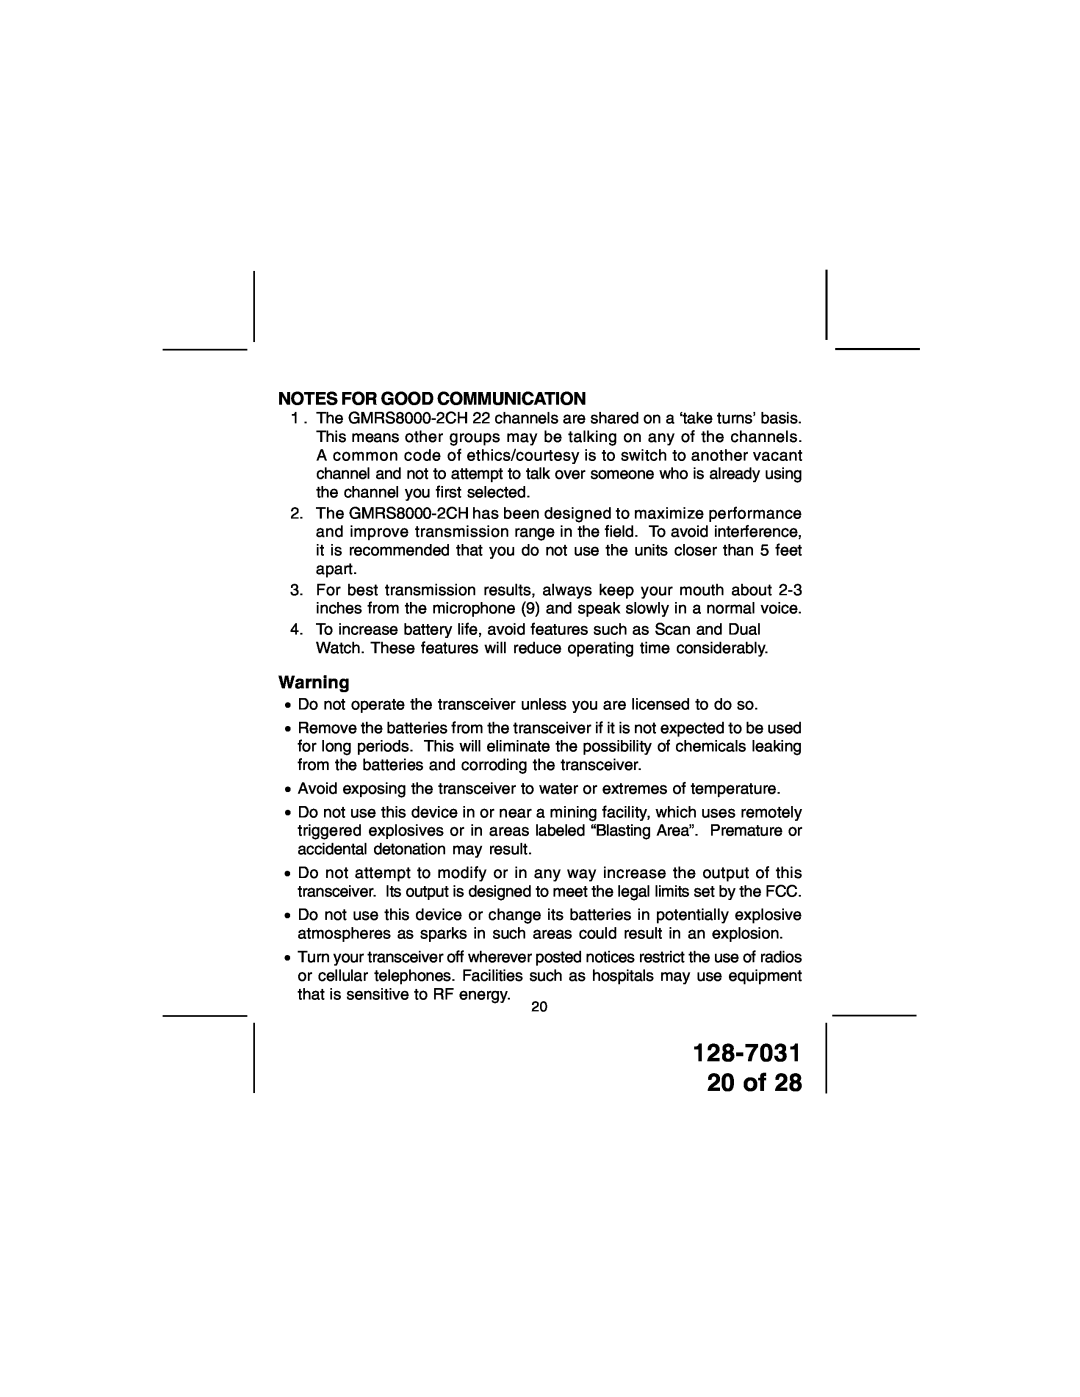 Audiovox owner manual 128-7031 20 of, Notes For Good Communication 